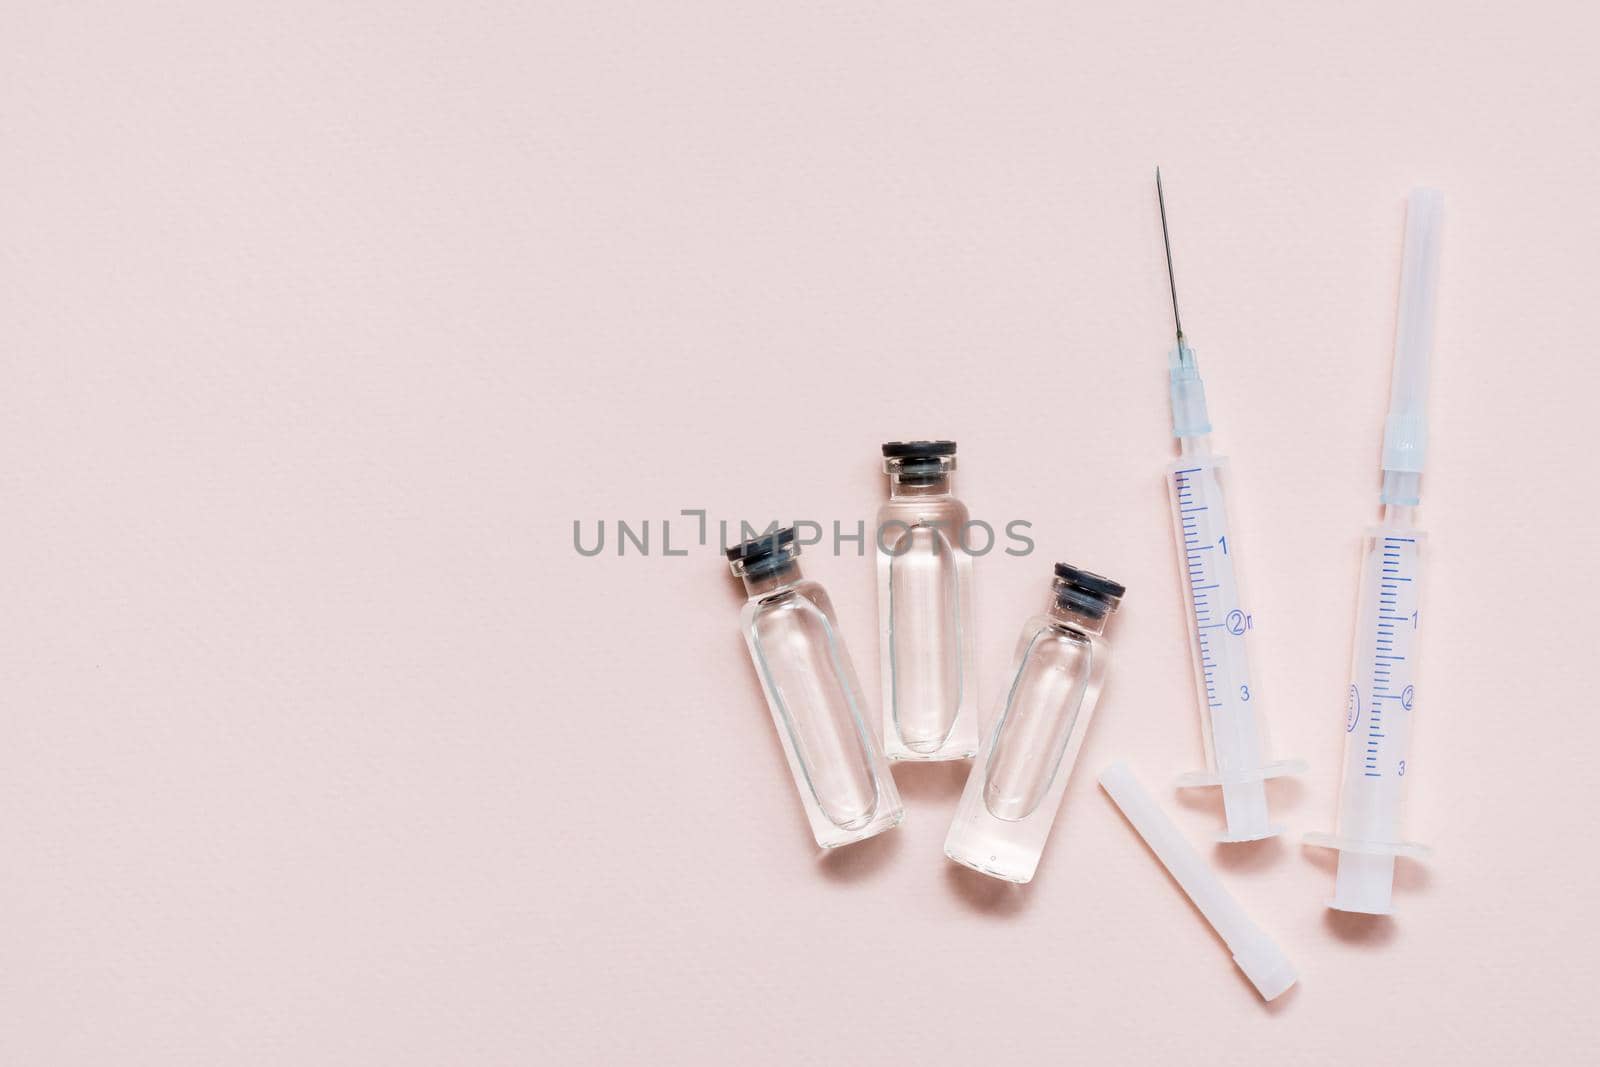 Vaccination and Immunization. Vaccine vials and clean syringes. Top view. Copy space